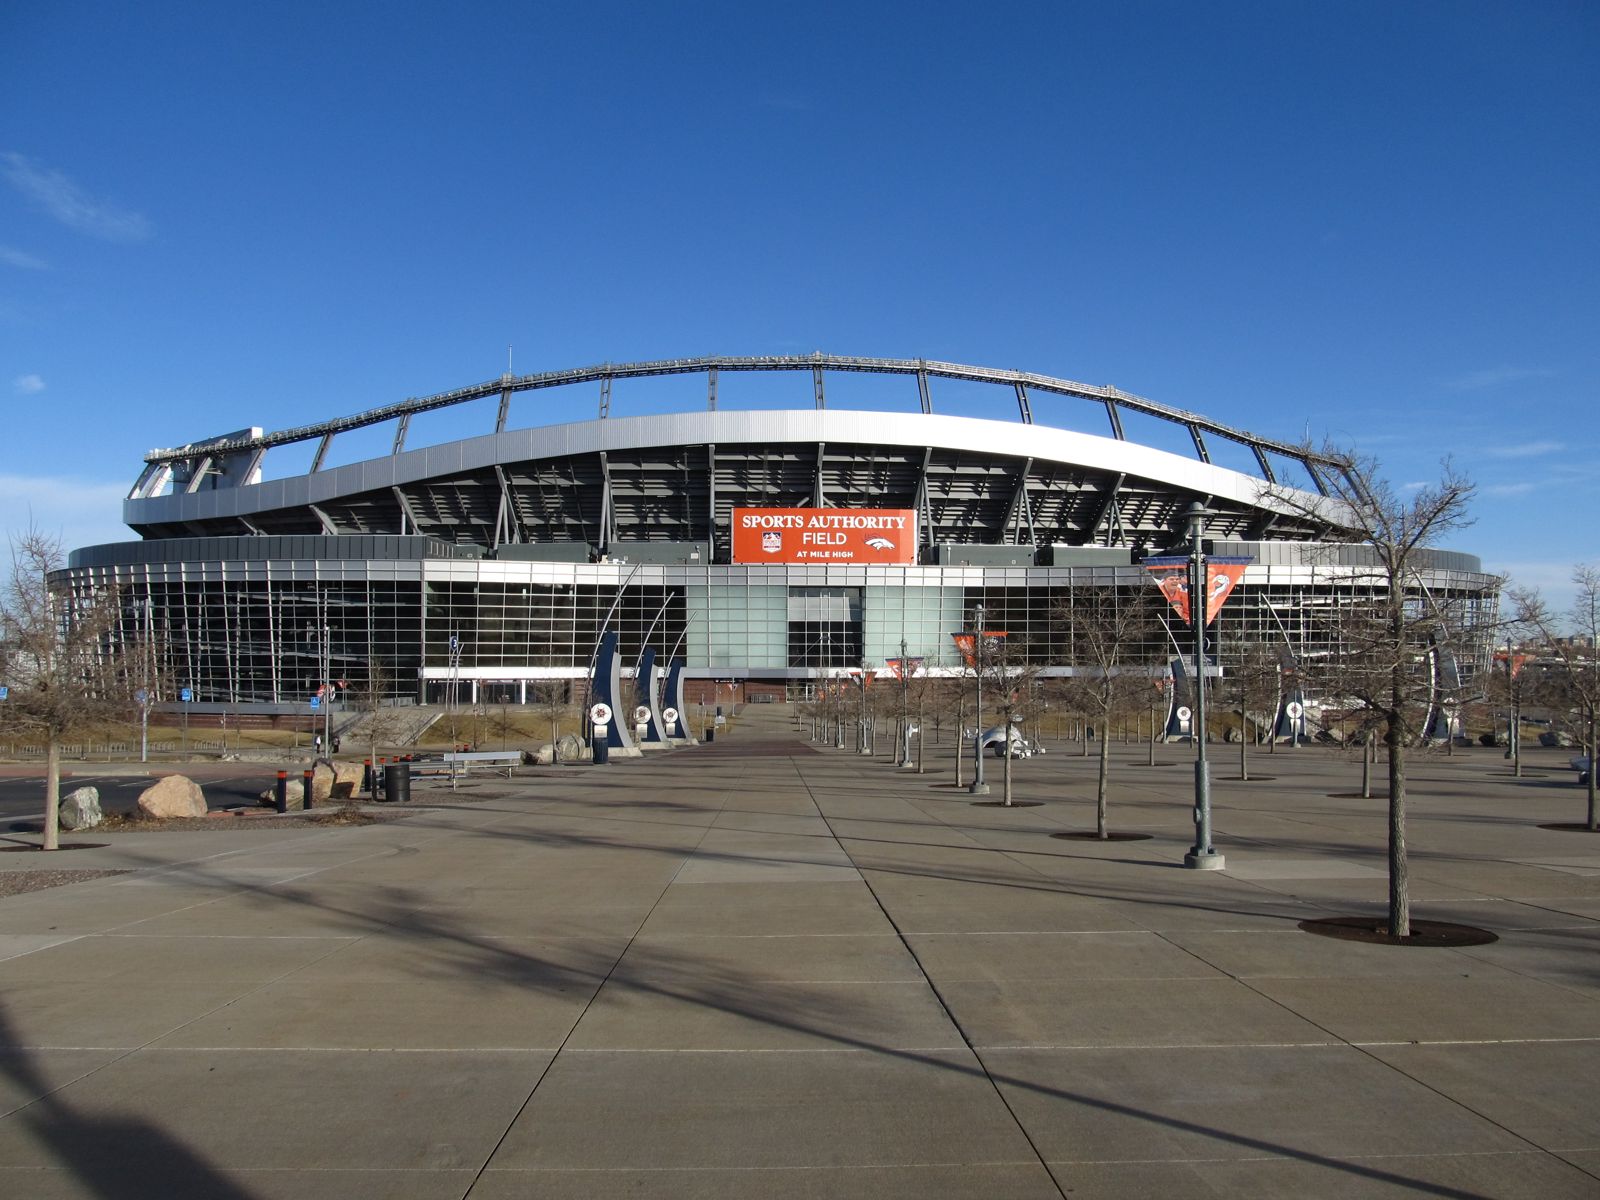 The History of Empower Field at Mile High {A Denver Highlands